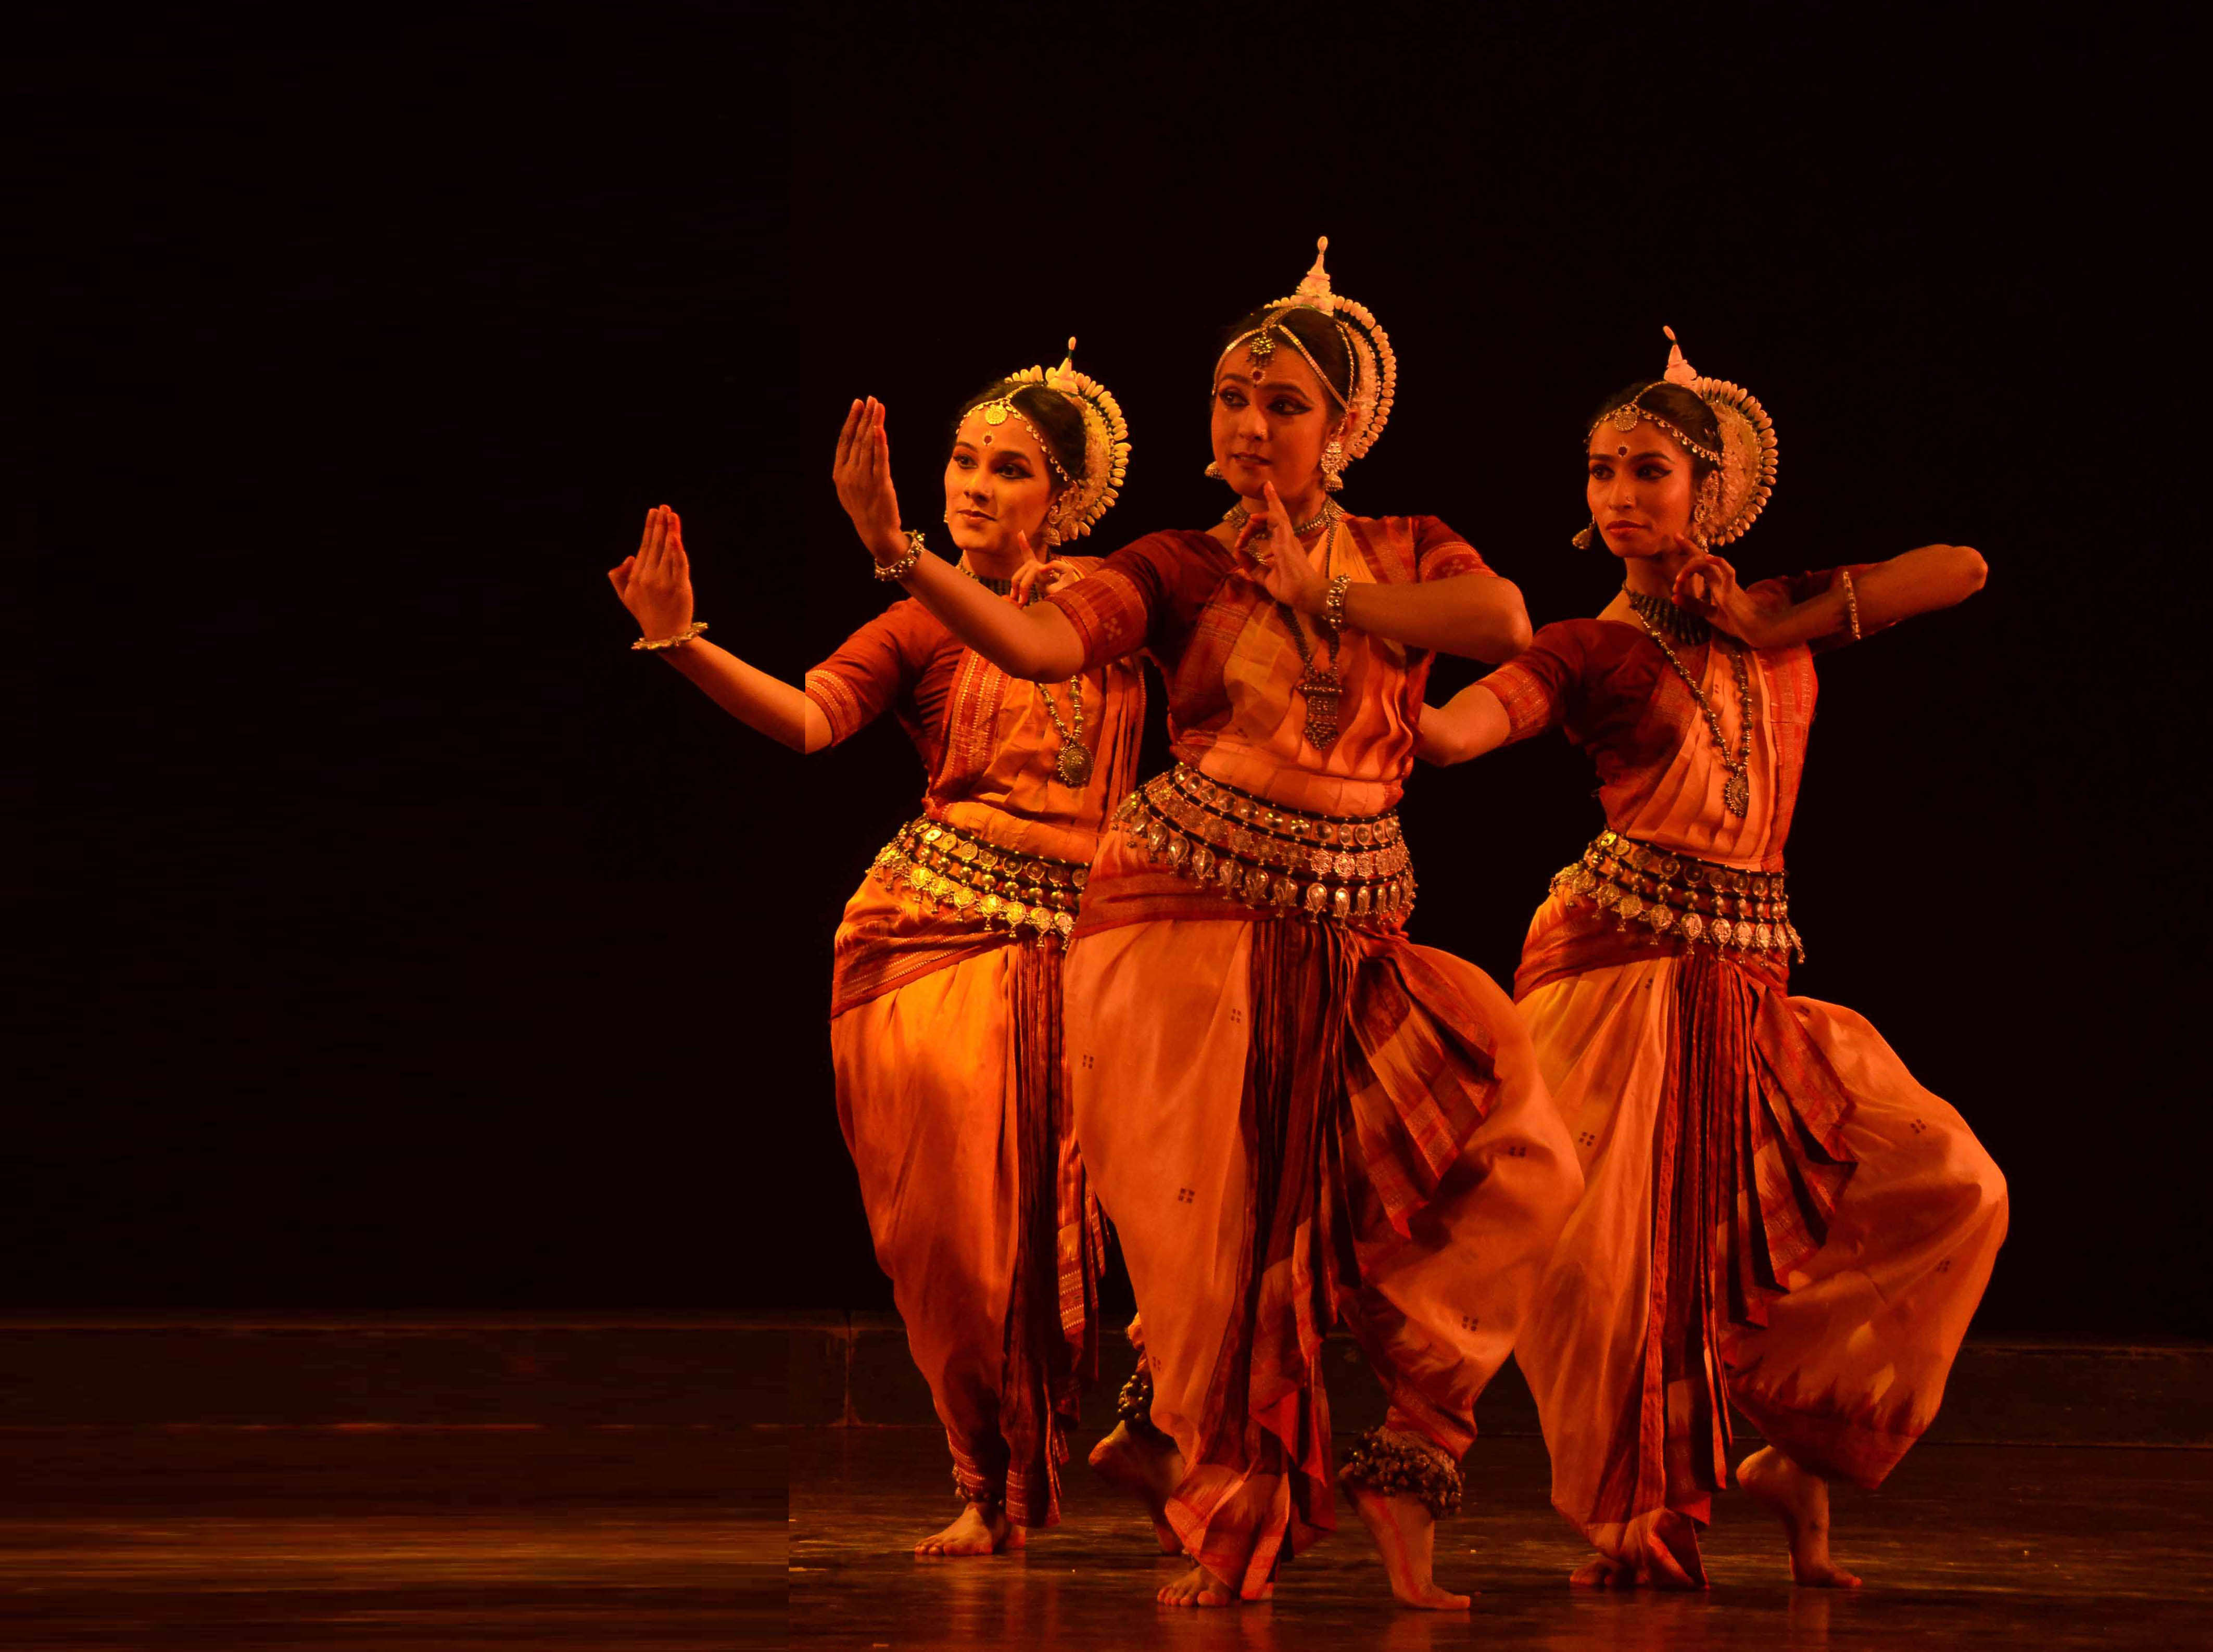  Kathak dance at Dance Festival | The Benefits of Studying in India